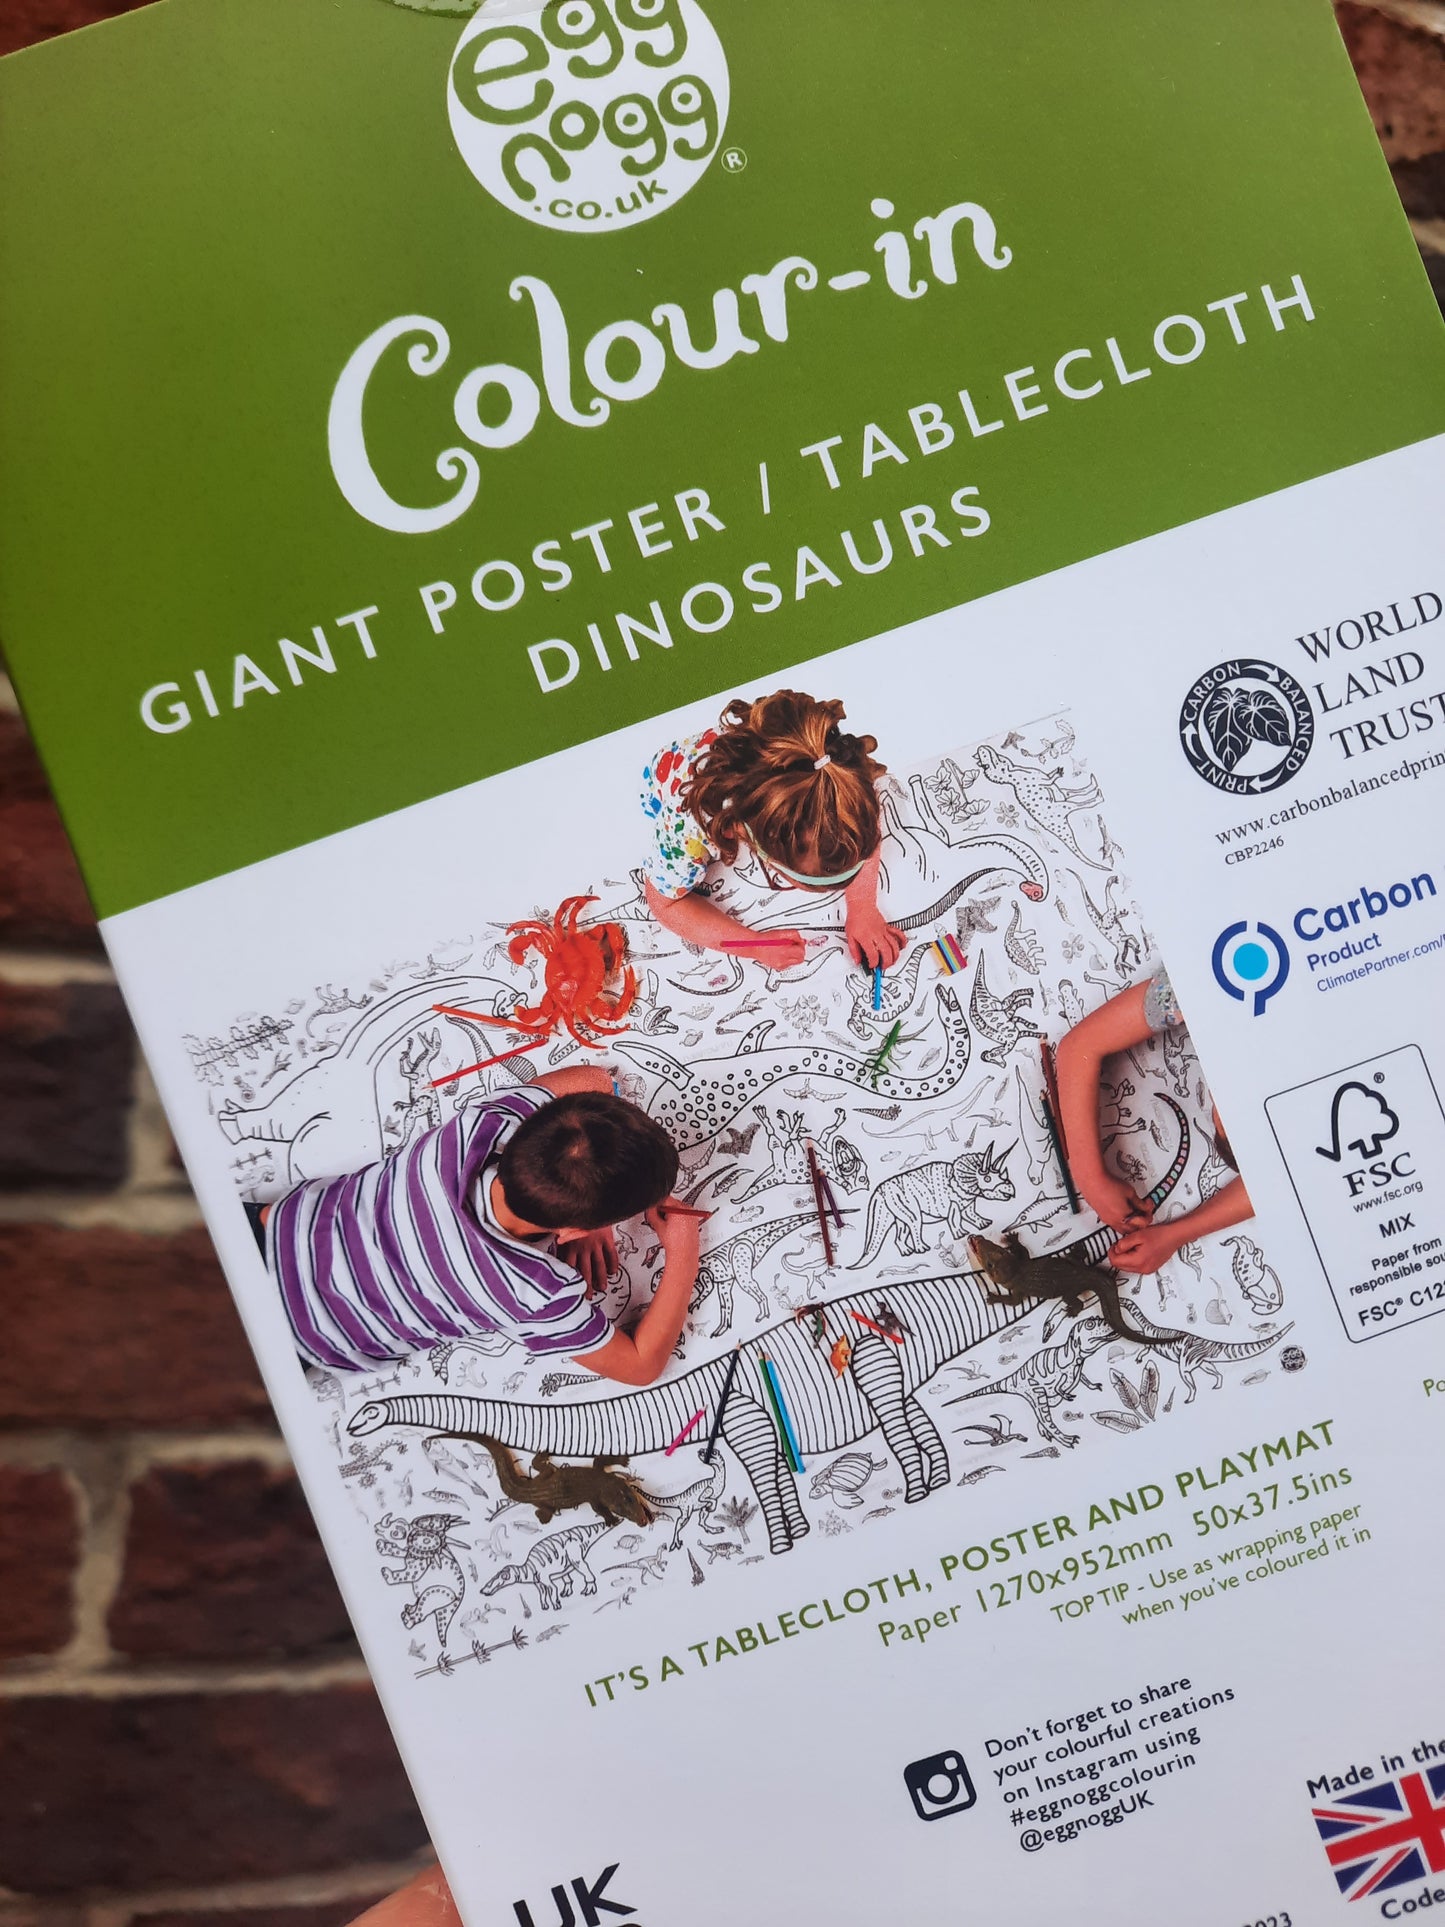 Dinosaurs Colour-In Giant Poster/Table Cloth